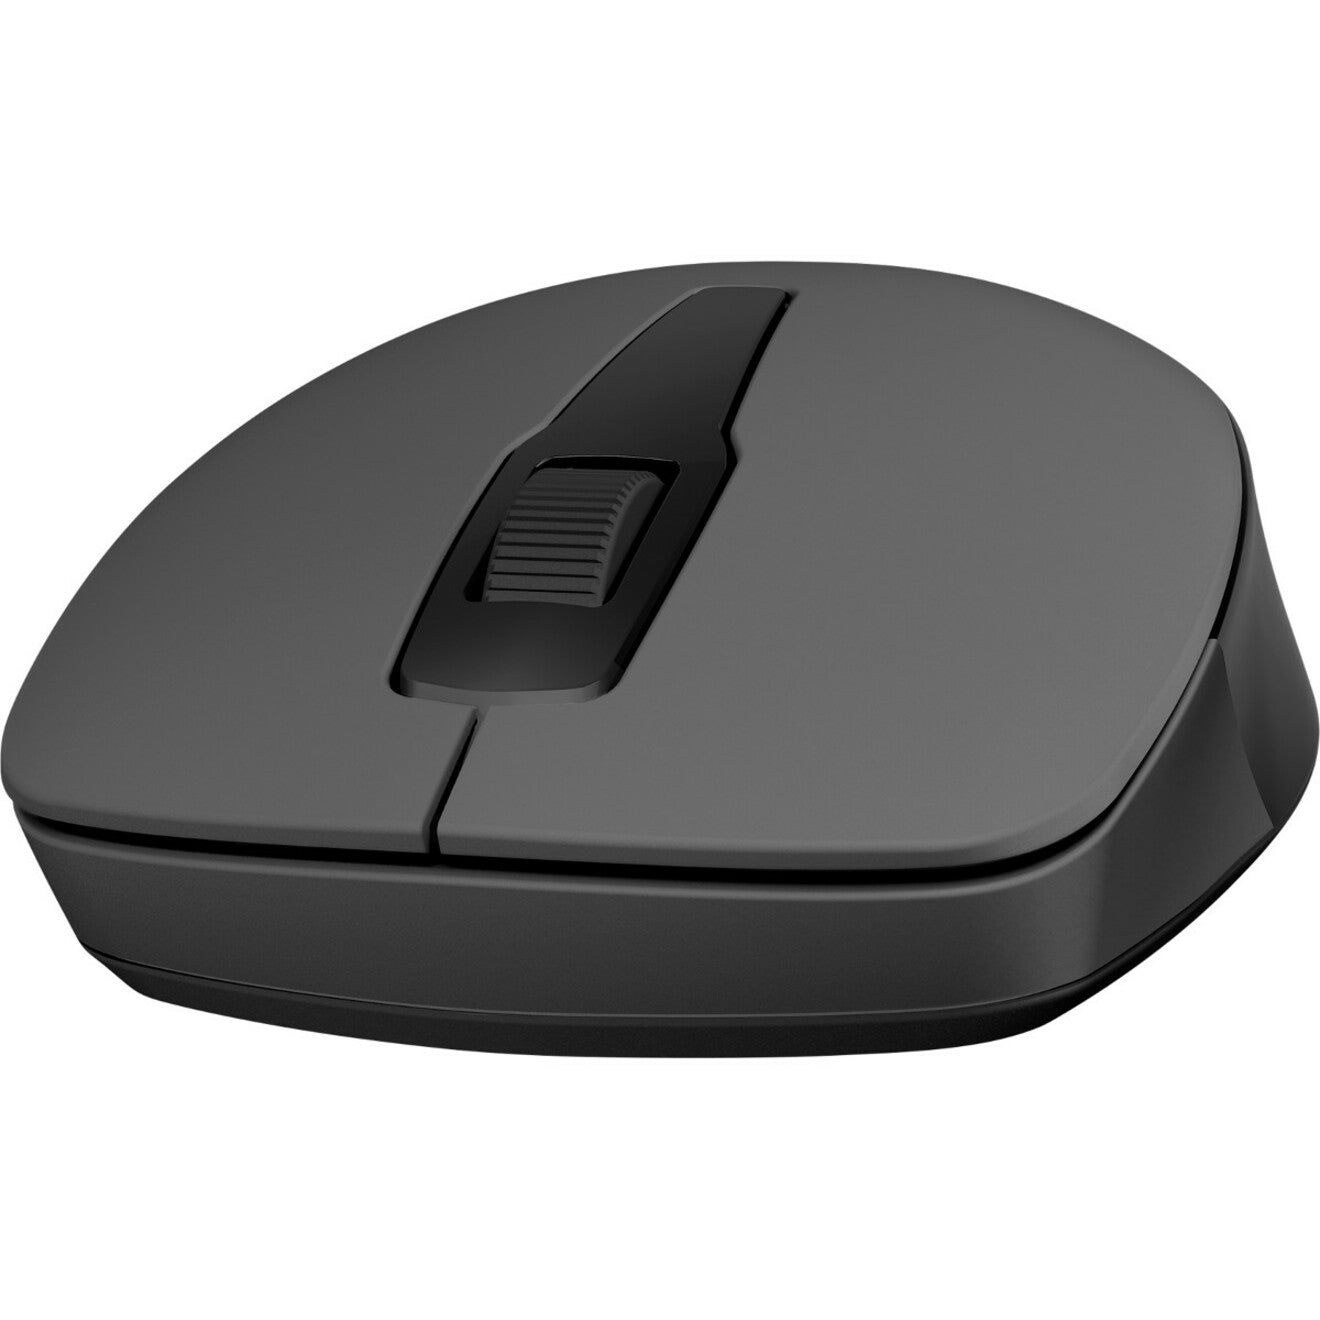 HP 2S9L1AA 150 Wireless Mouse, 2.4 GHz Optical, USB Type A